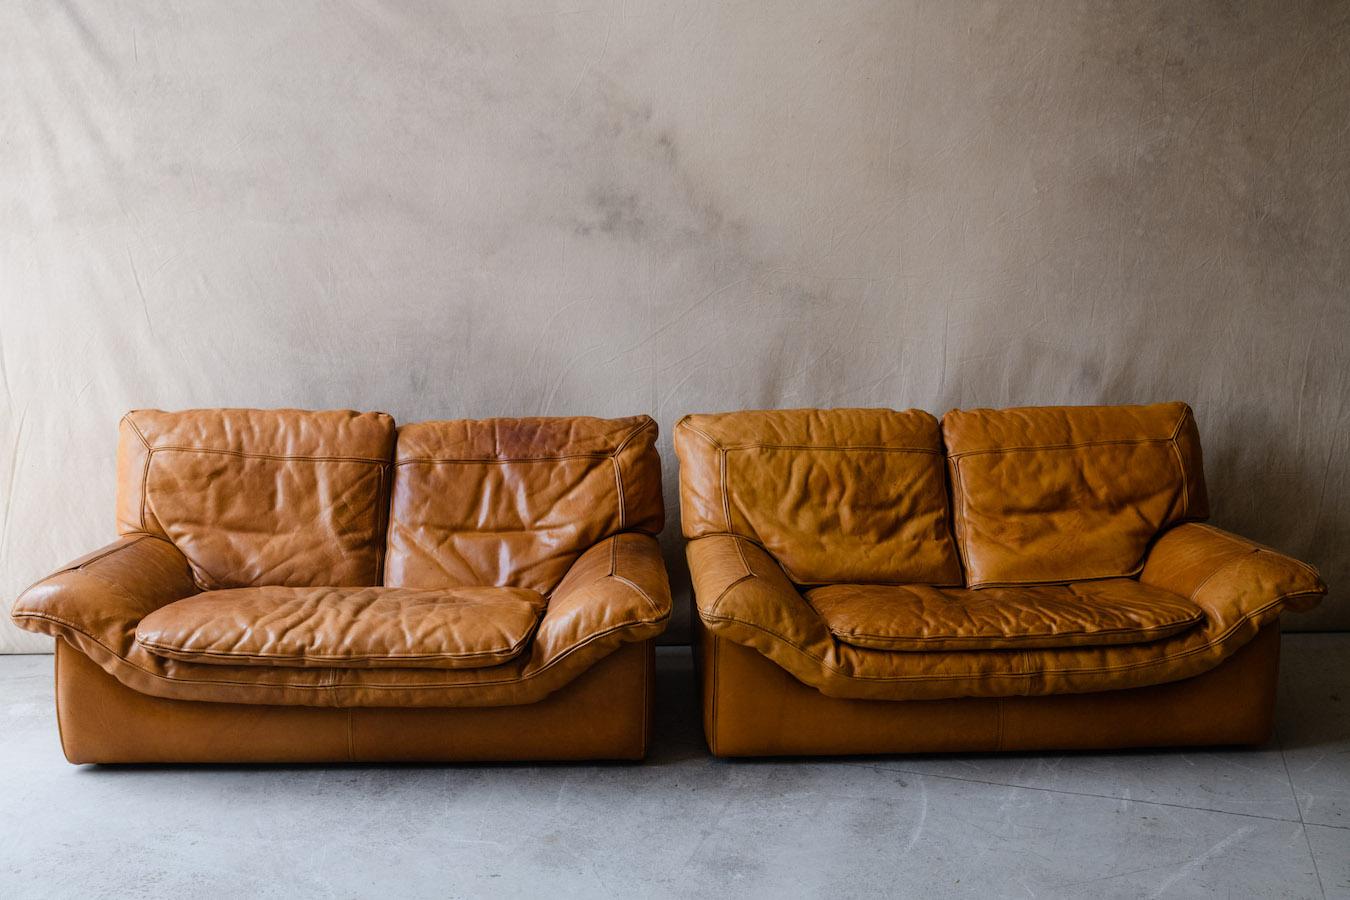 Vintage pair of leather Roche Bobois sofas from France, Circa 1970. Unusual pair in cognac leather with an amazing patina to the leather. Marked Roche Bobois under the cushions. Extremely comfortable.

We don't have the time to write an extensive